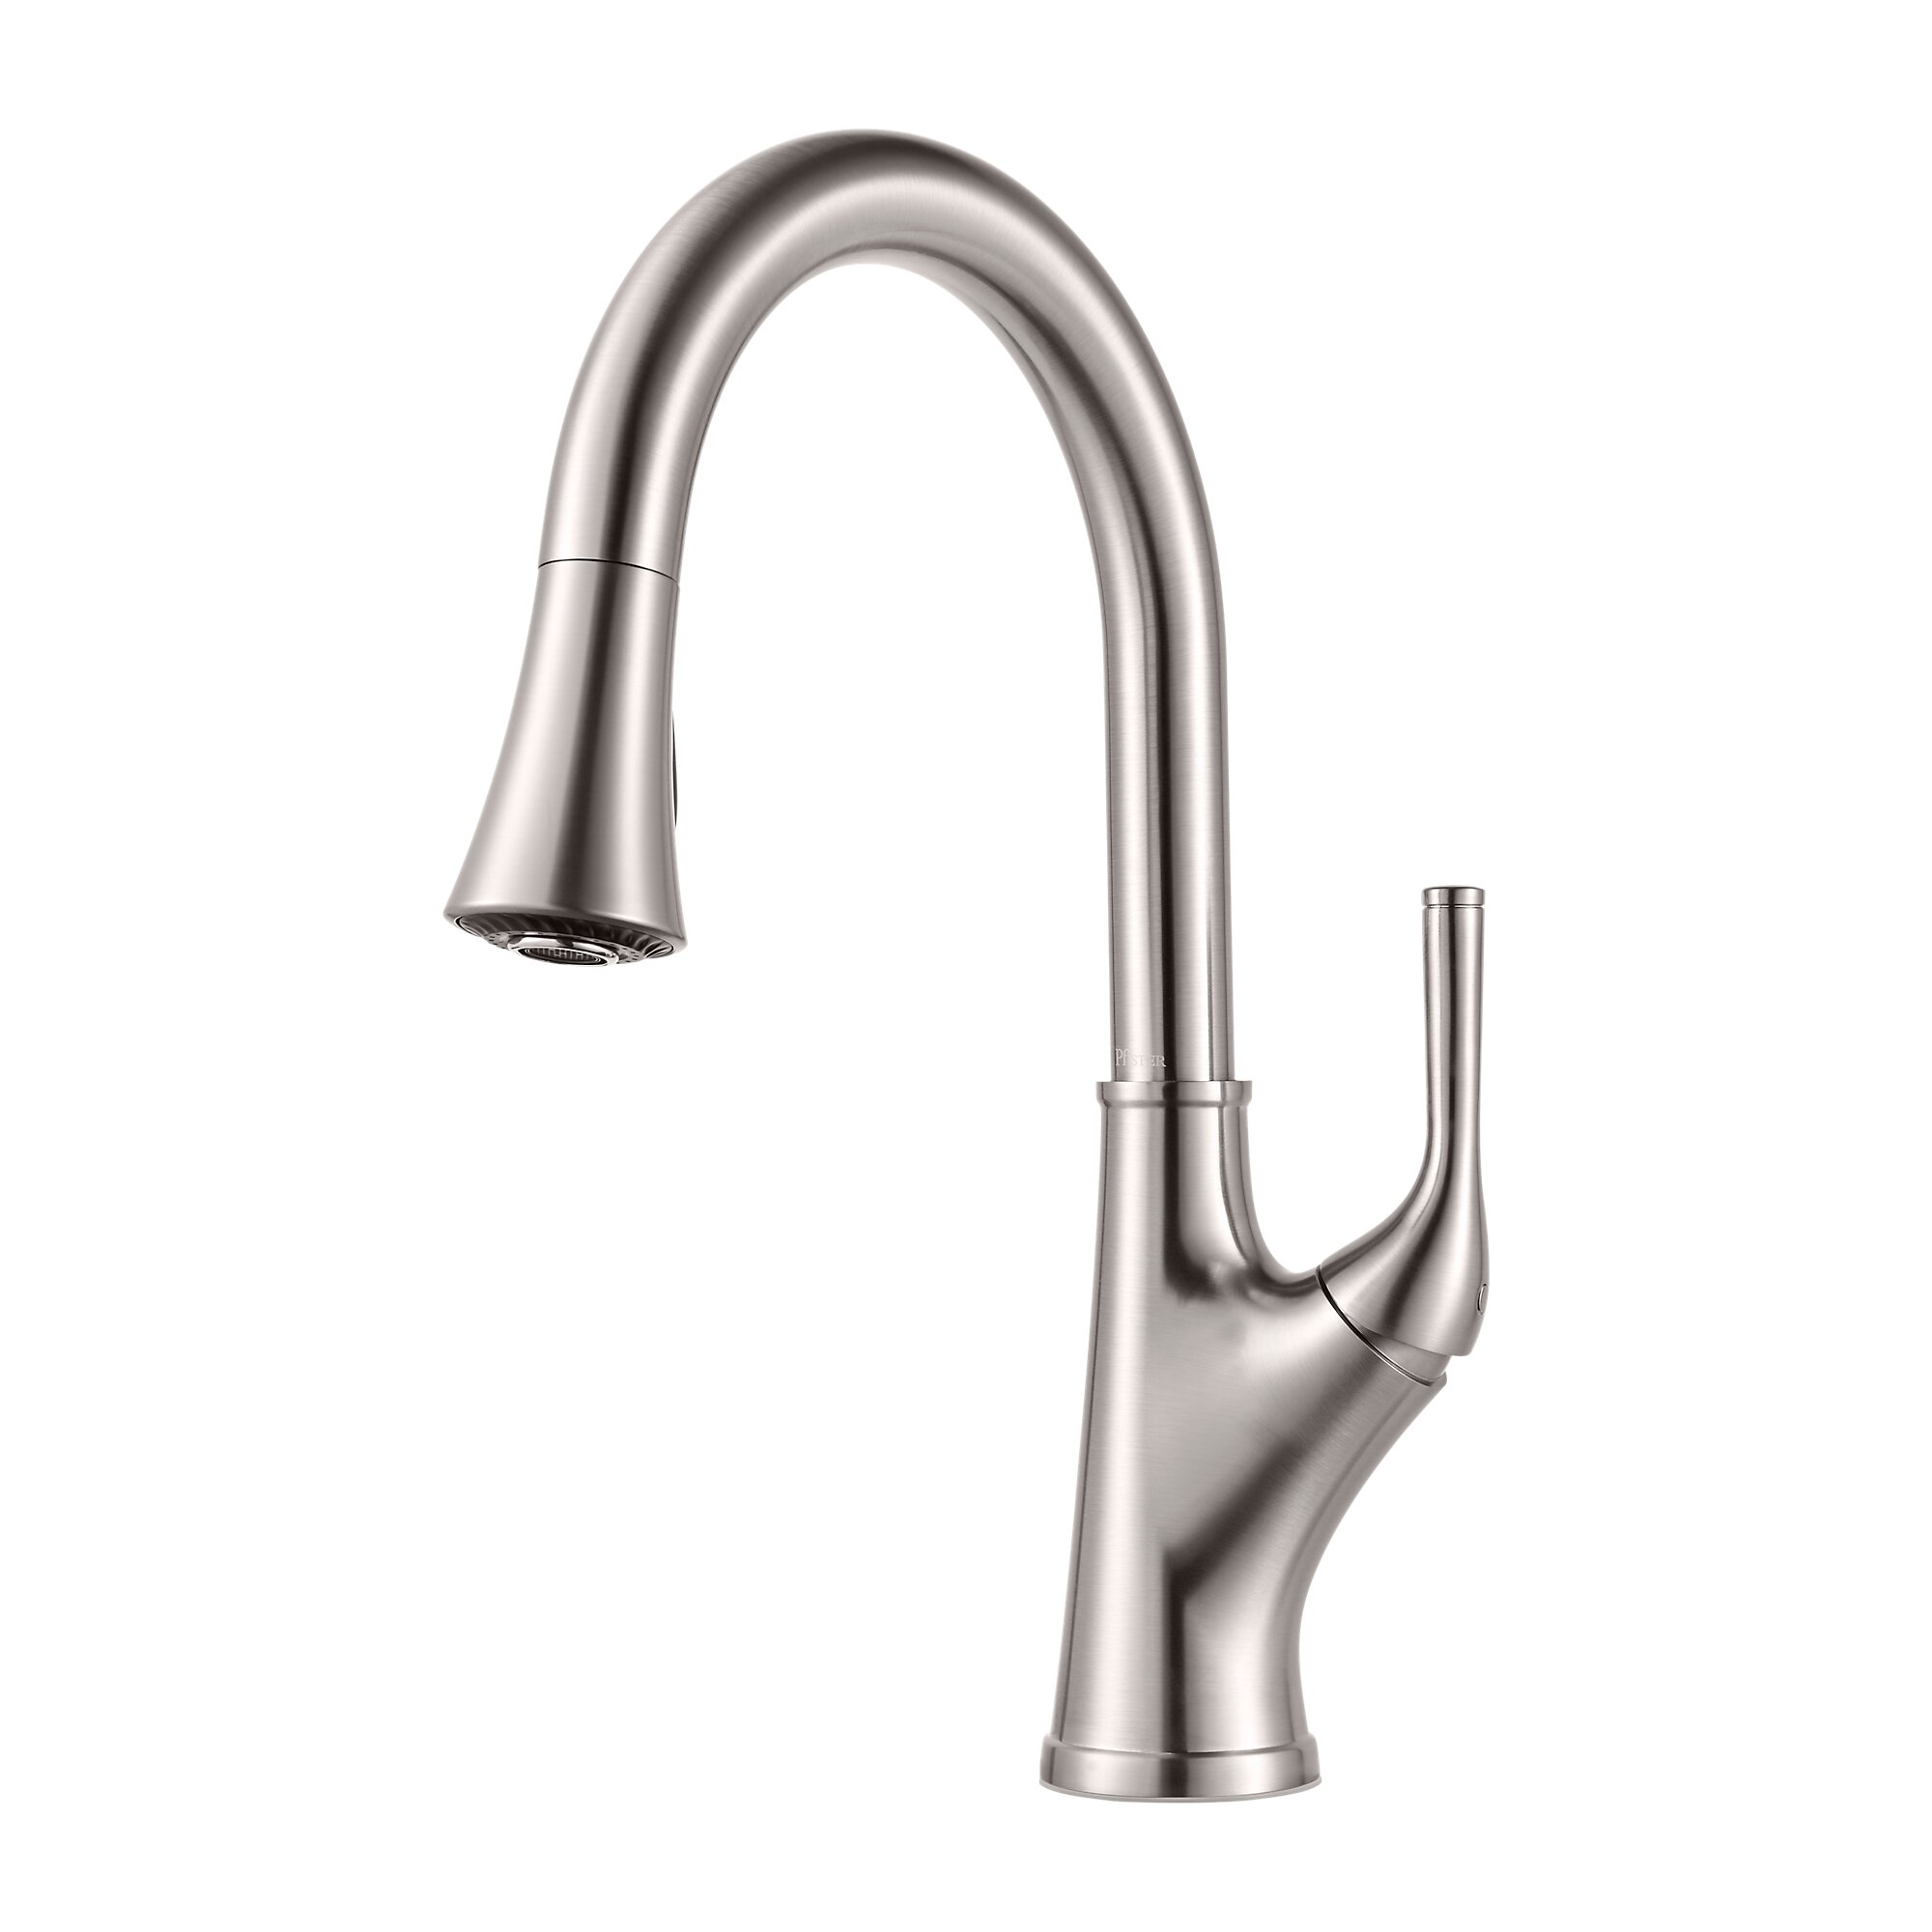 PFISTER F-529-7CRS CANTARA 15 1/2 INCH SINGLE LEVER HANDLE DECK MOUNT PULL-DOWN KITCHEN FAUCET - STAINLESS STEEL